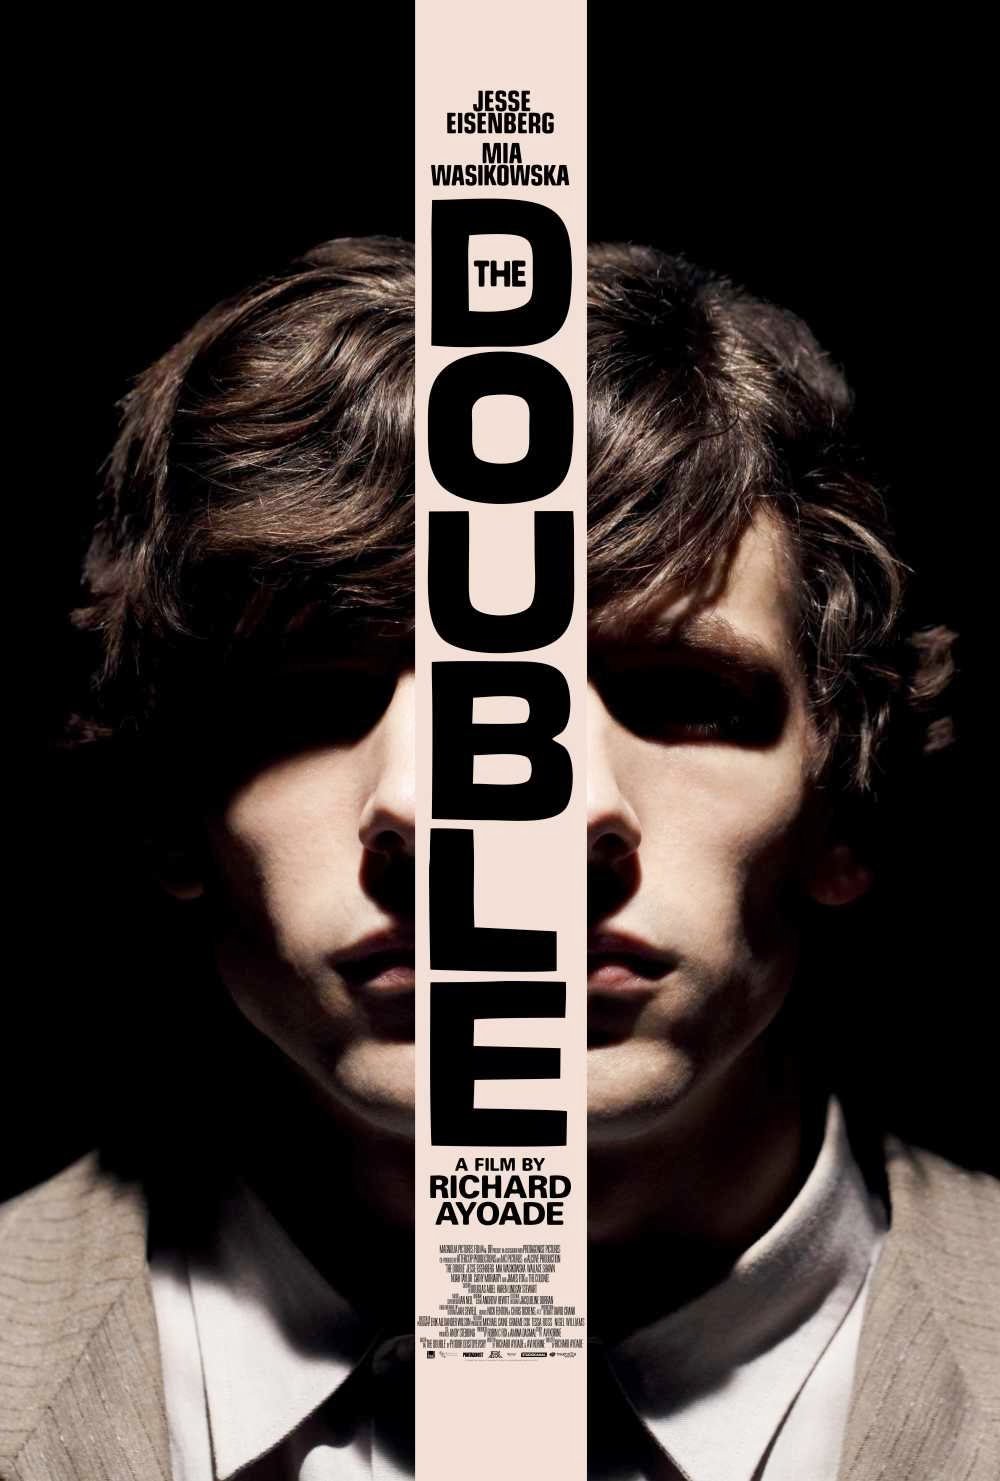 Poster of the movie The Double